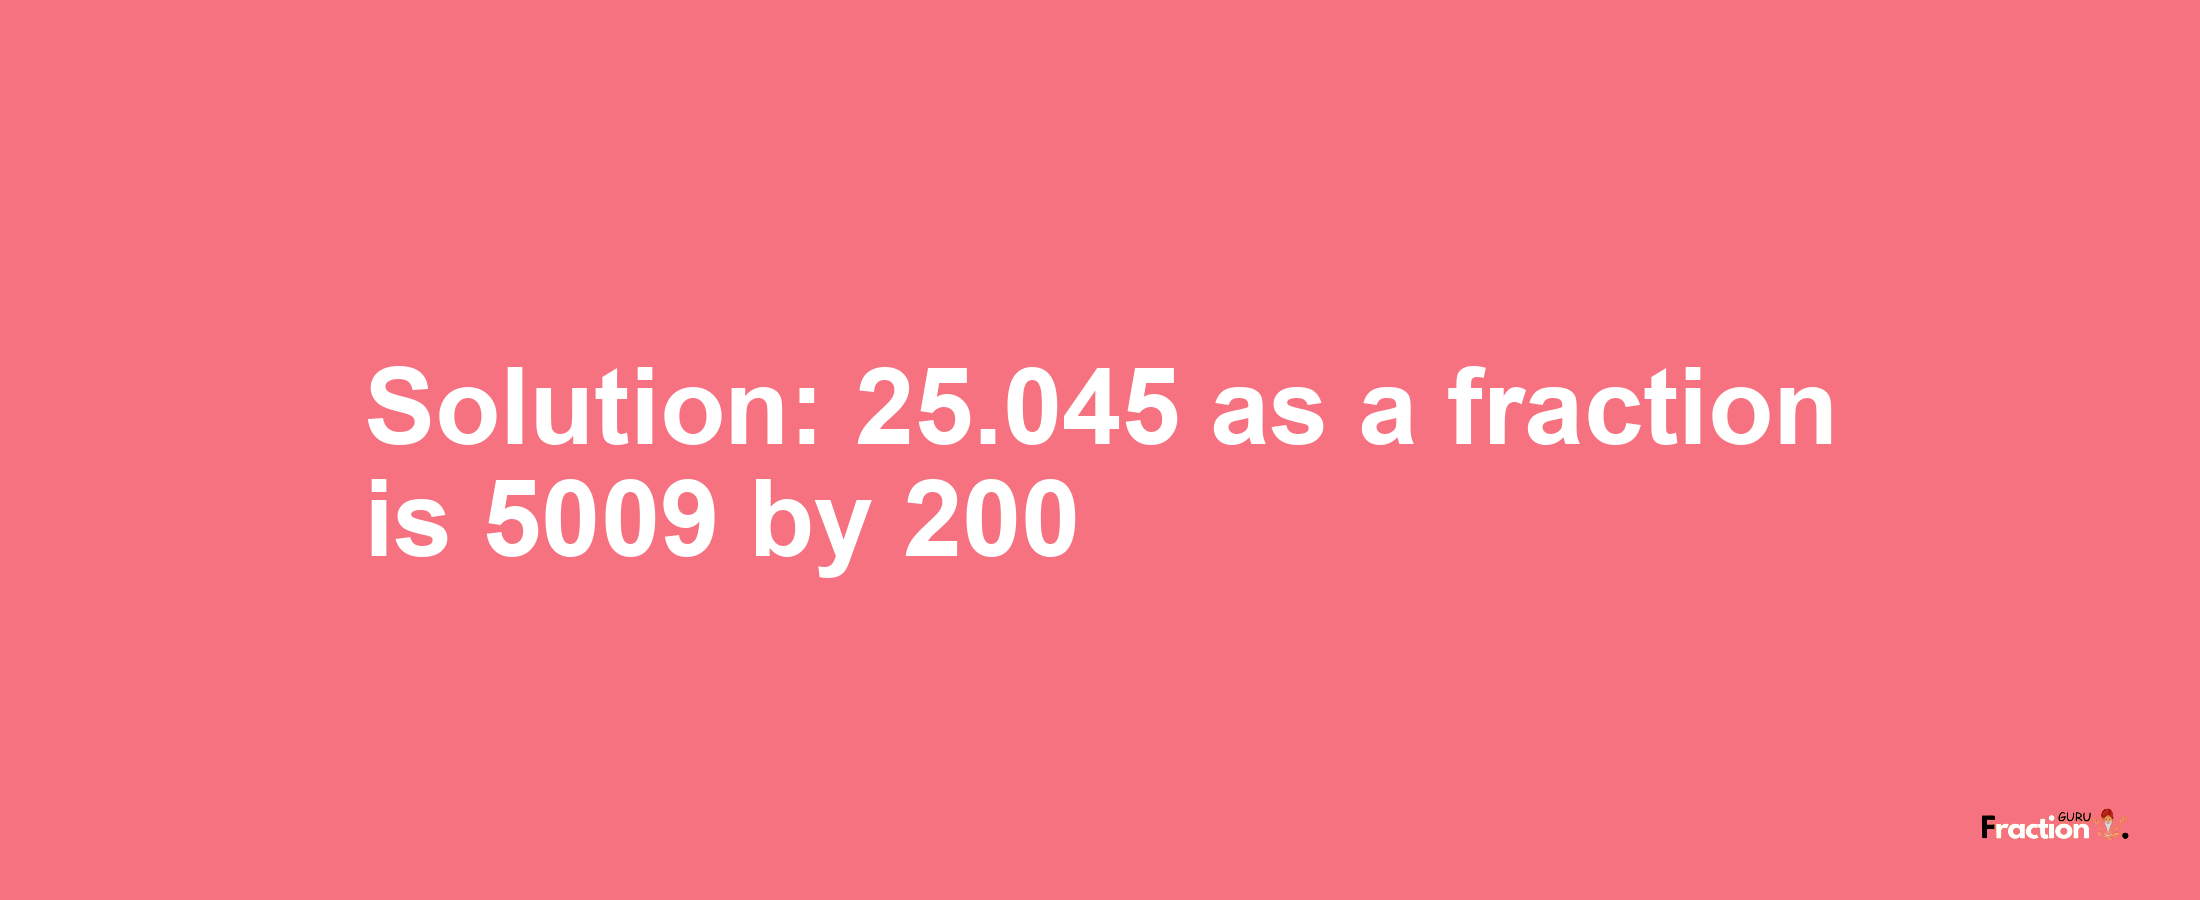 Solution:25.045 as a fraction is 5009/200